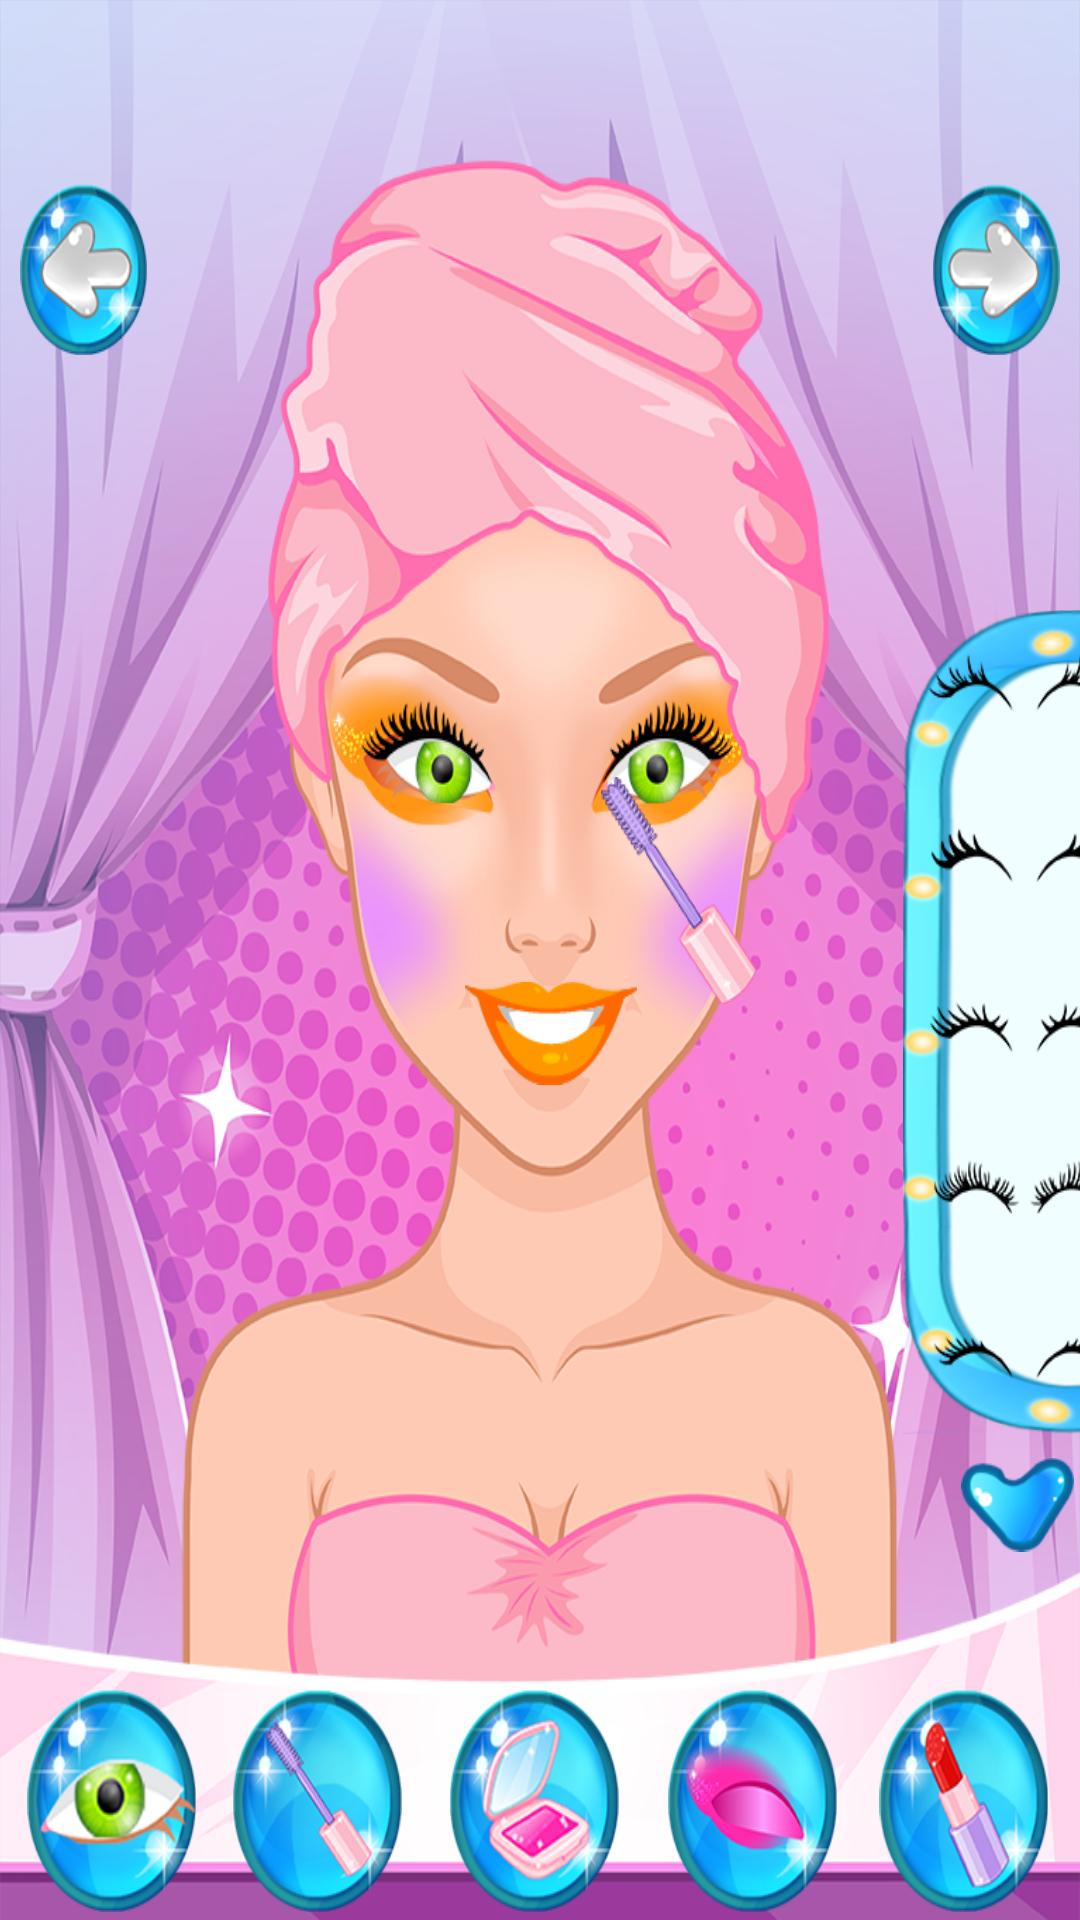 Barbie Games and Makeup Artist : games for girls for Android - APK Download